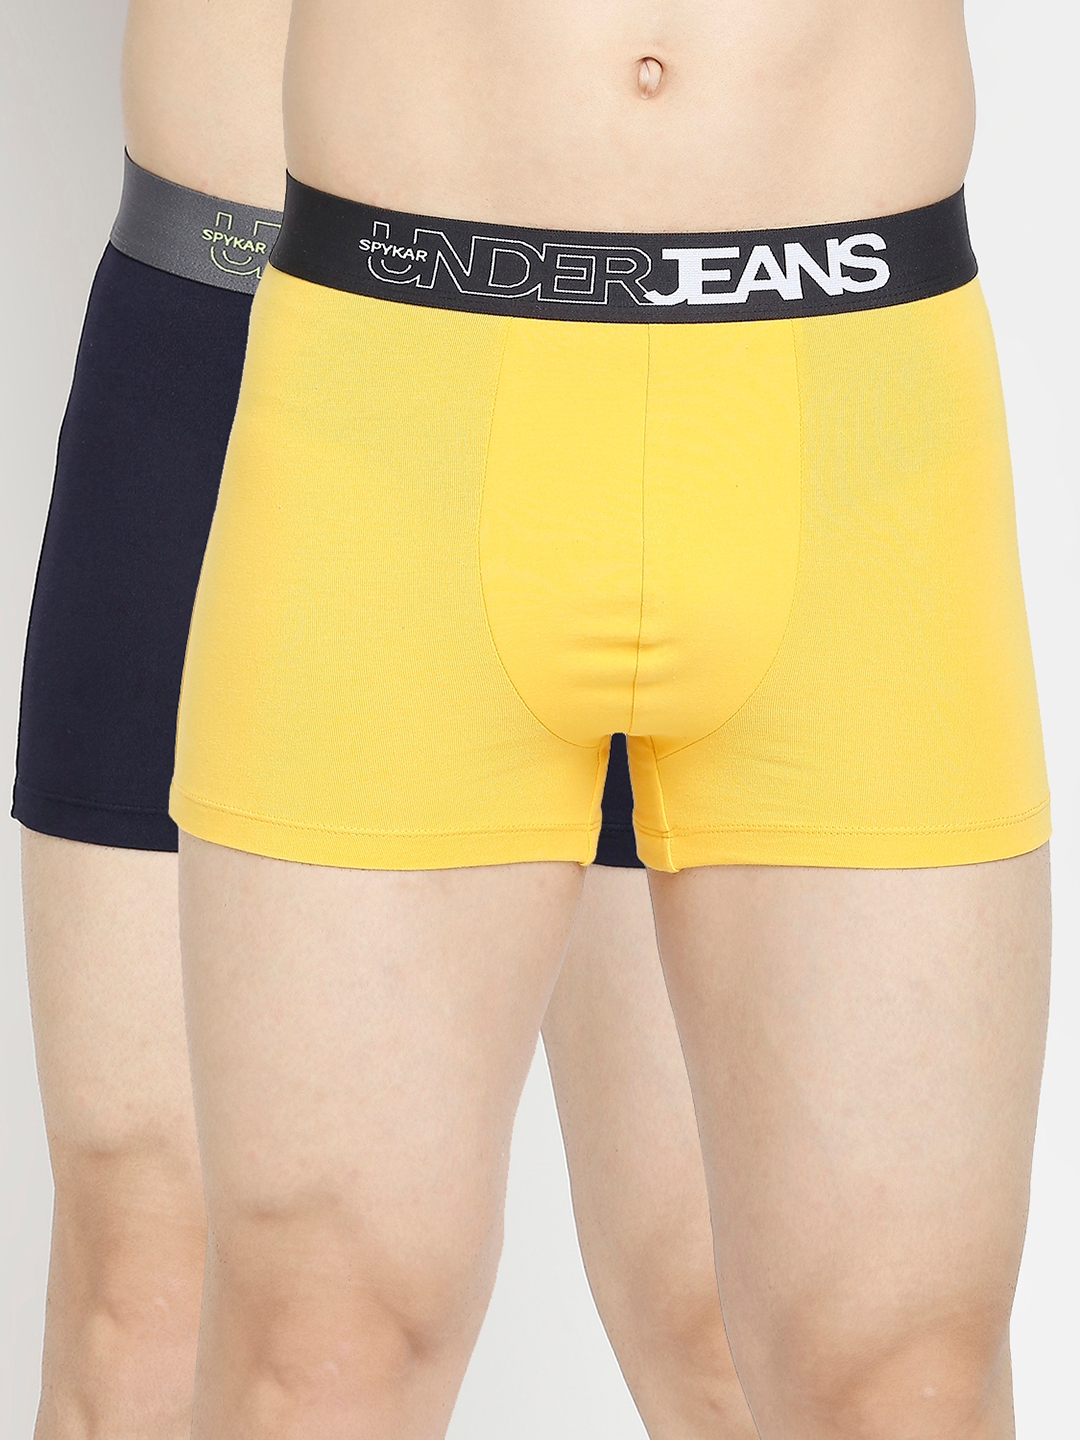 Underjeans by Spykar Yellow & Navy Blue Cotton Blend Trunk - Pack Of 2